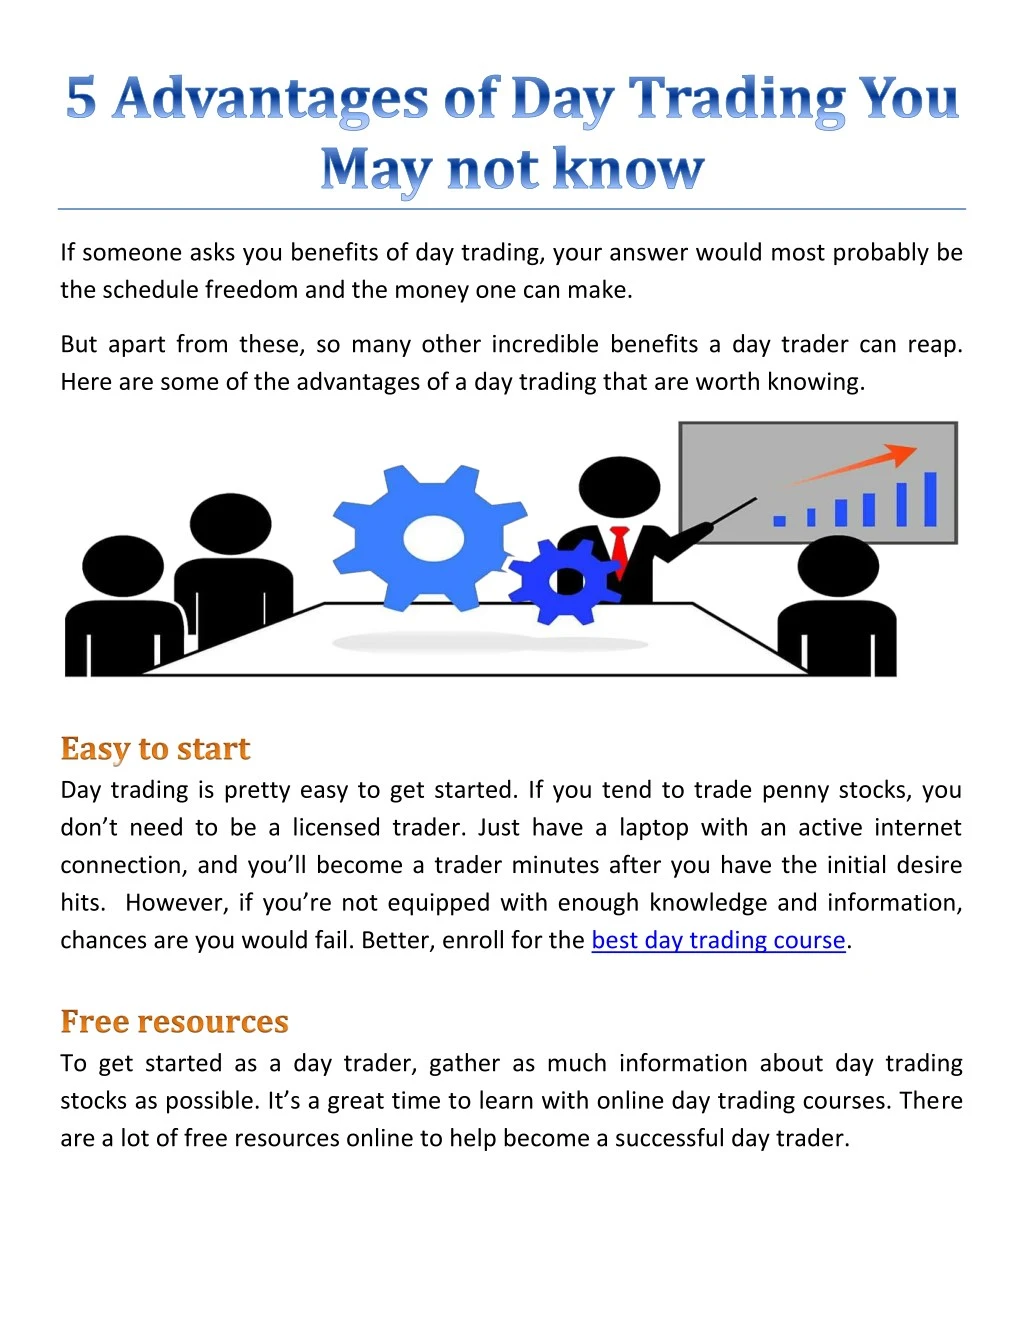 if someone asks you benefits of day trading your